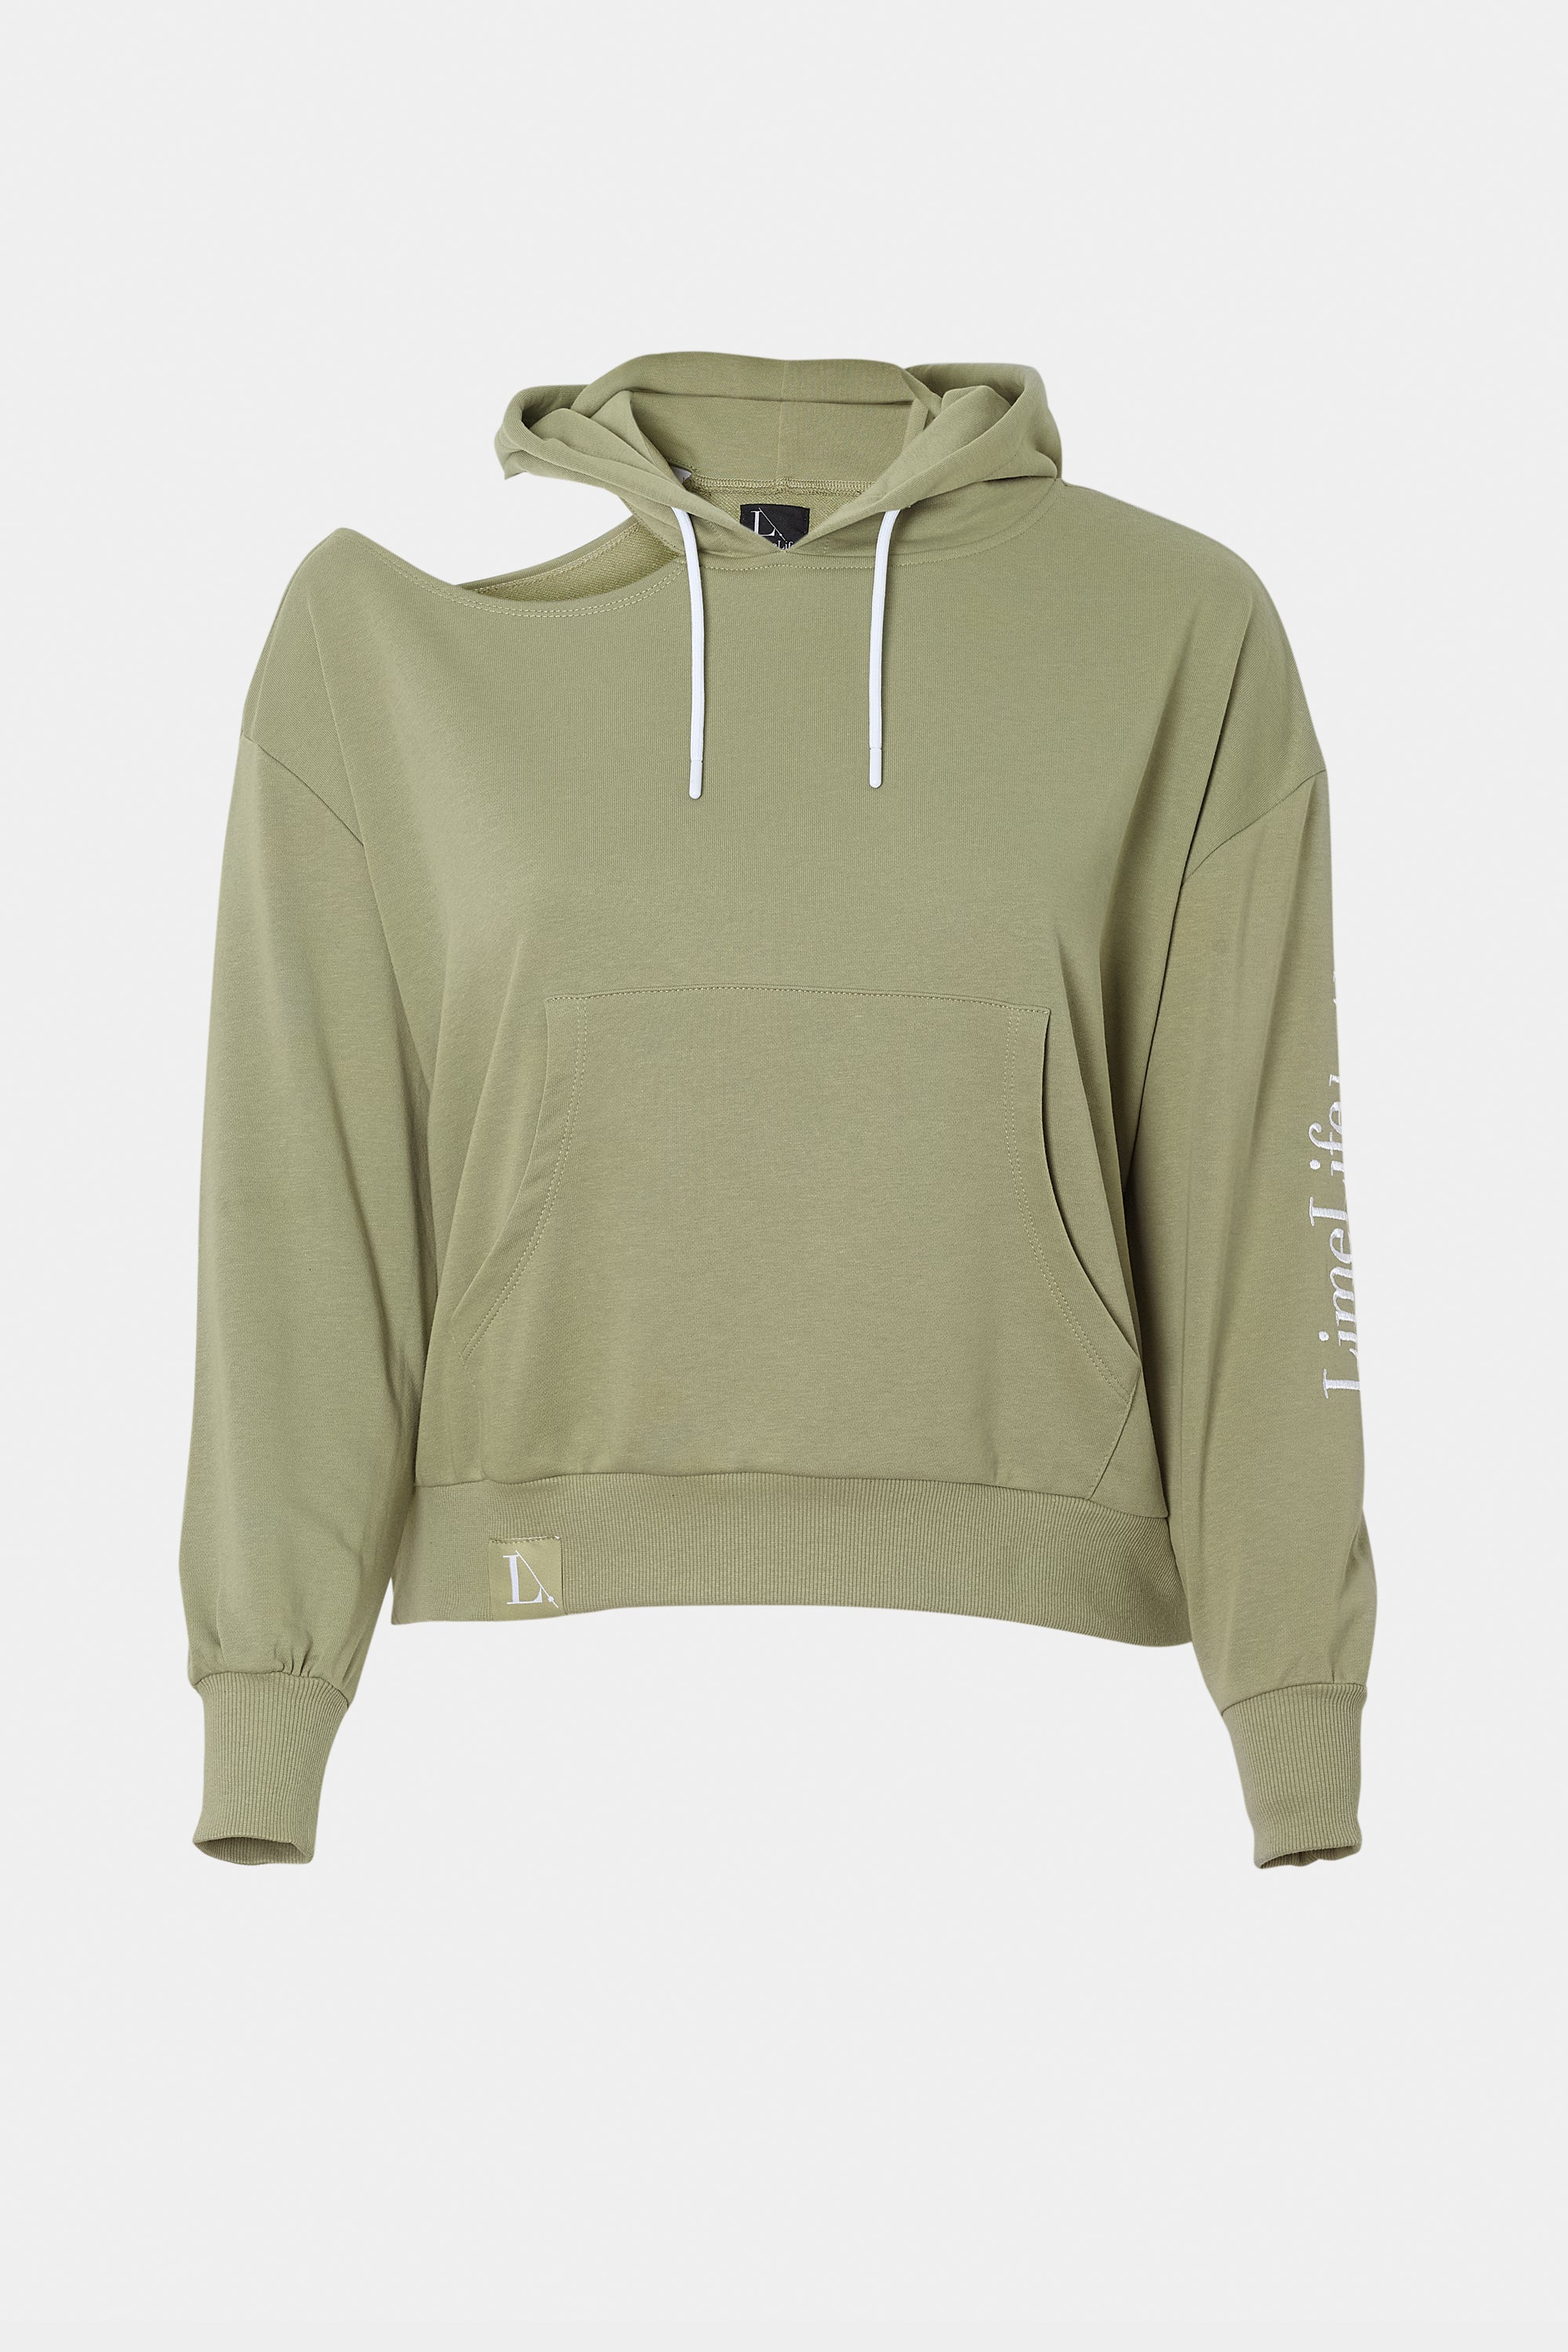 THE "GO-TWO" HOODIE